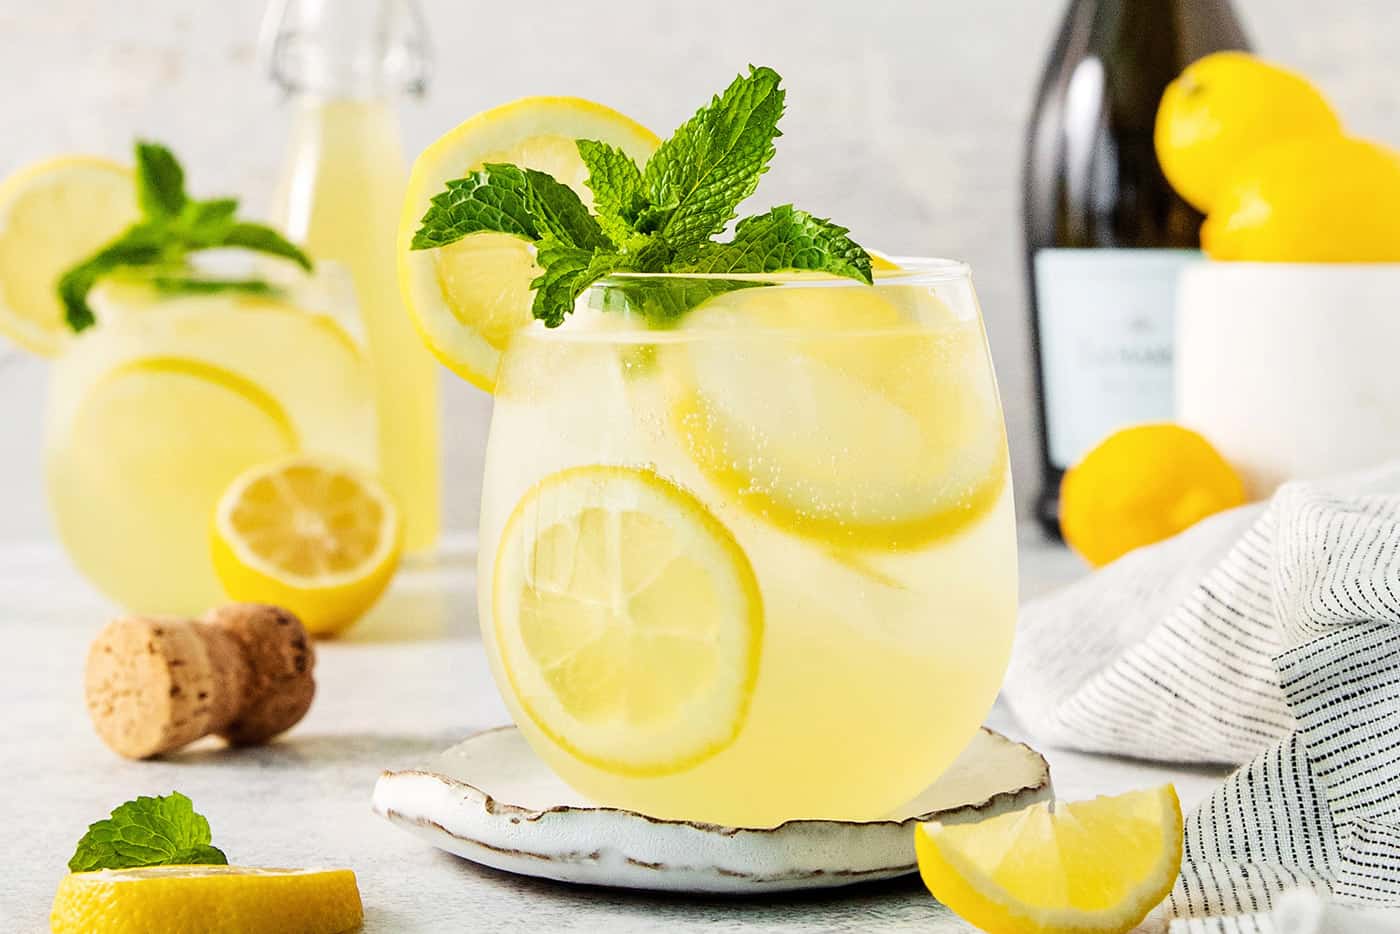 A glass of limoncello spritz garnished with mint.